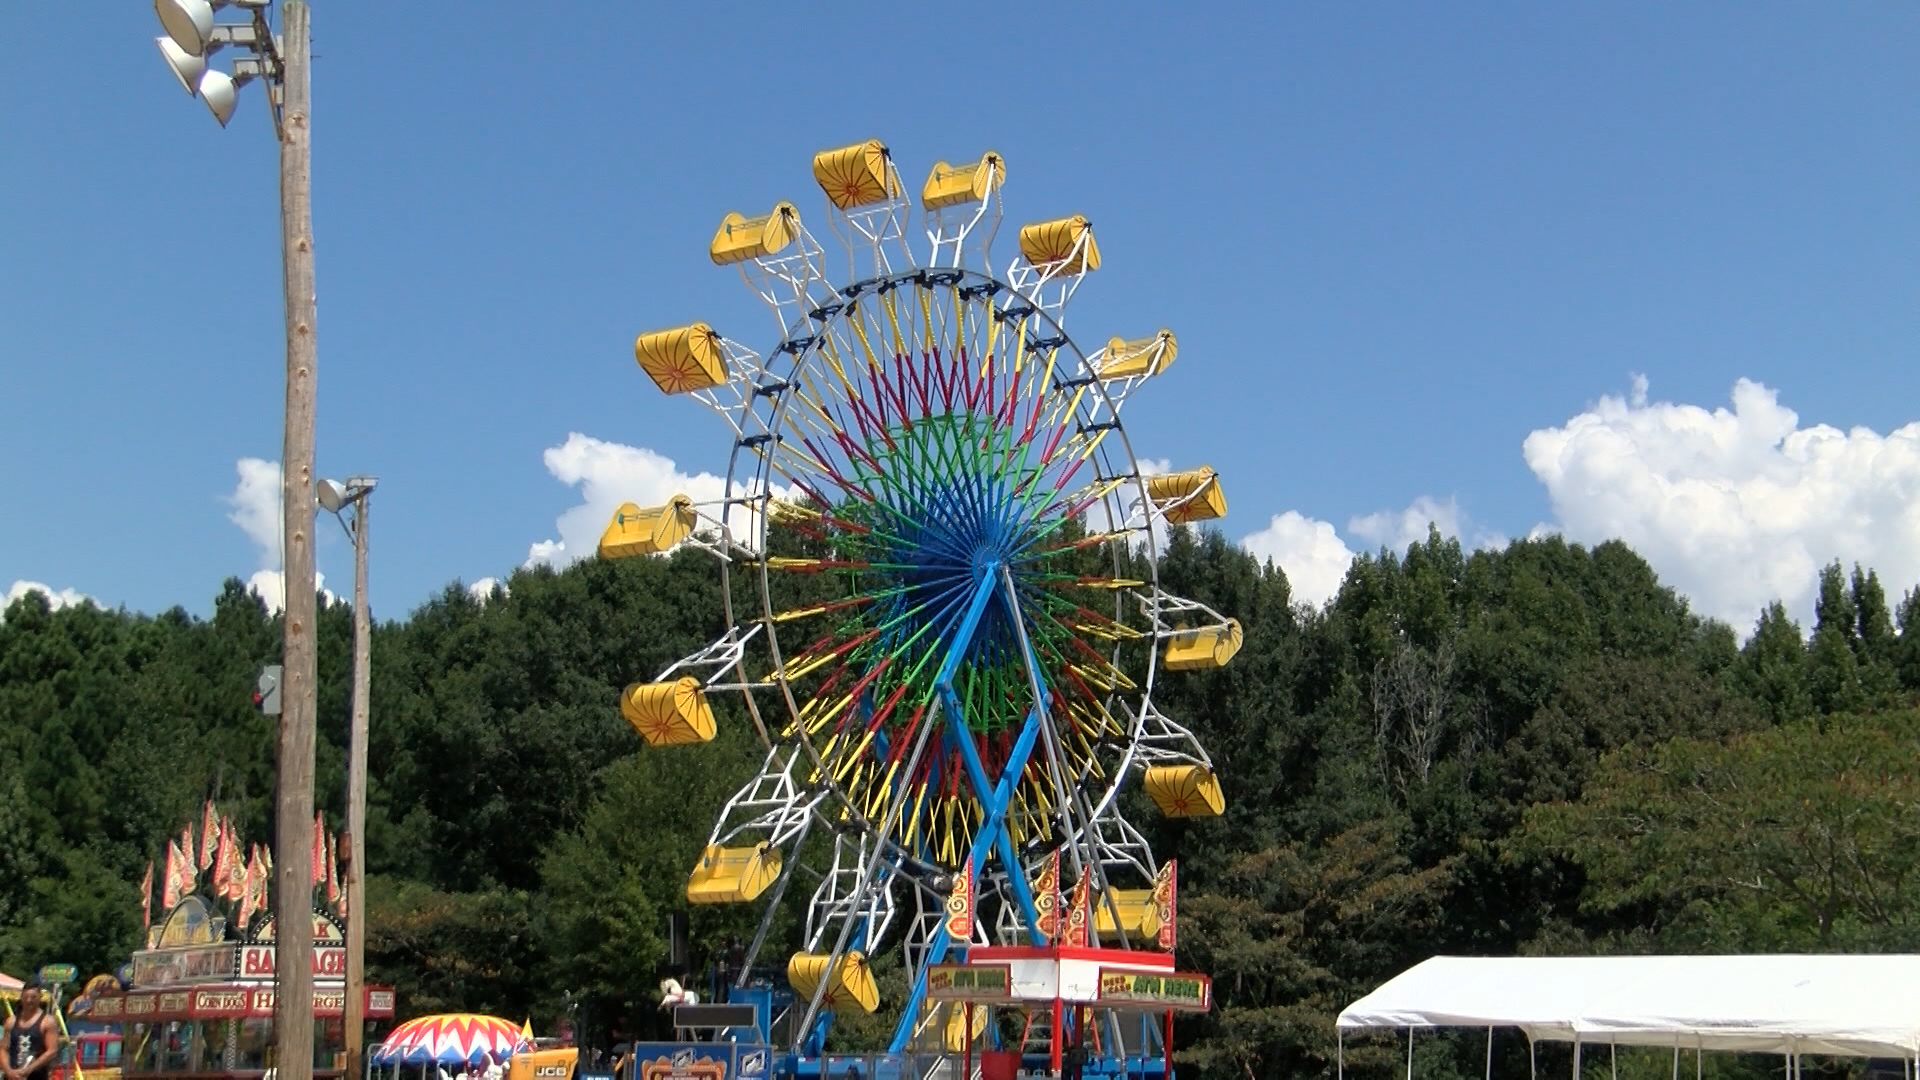 WEST ALABAMA STATE FAIR OPEN FOR BUSINESS WVUA 23